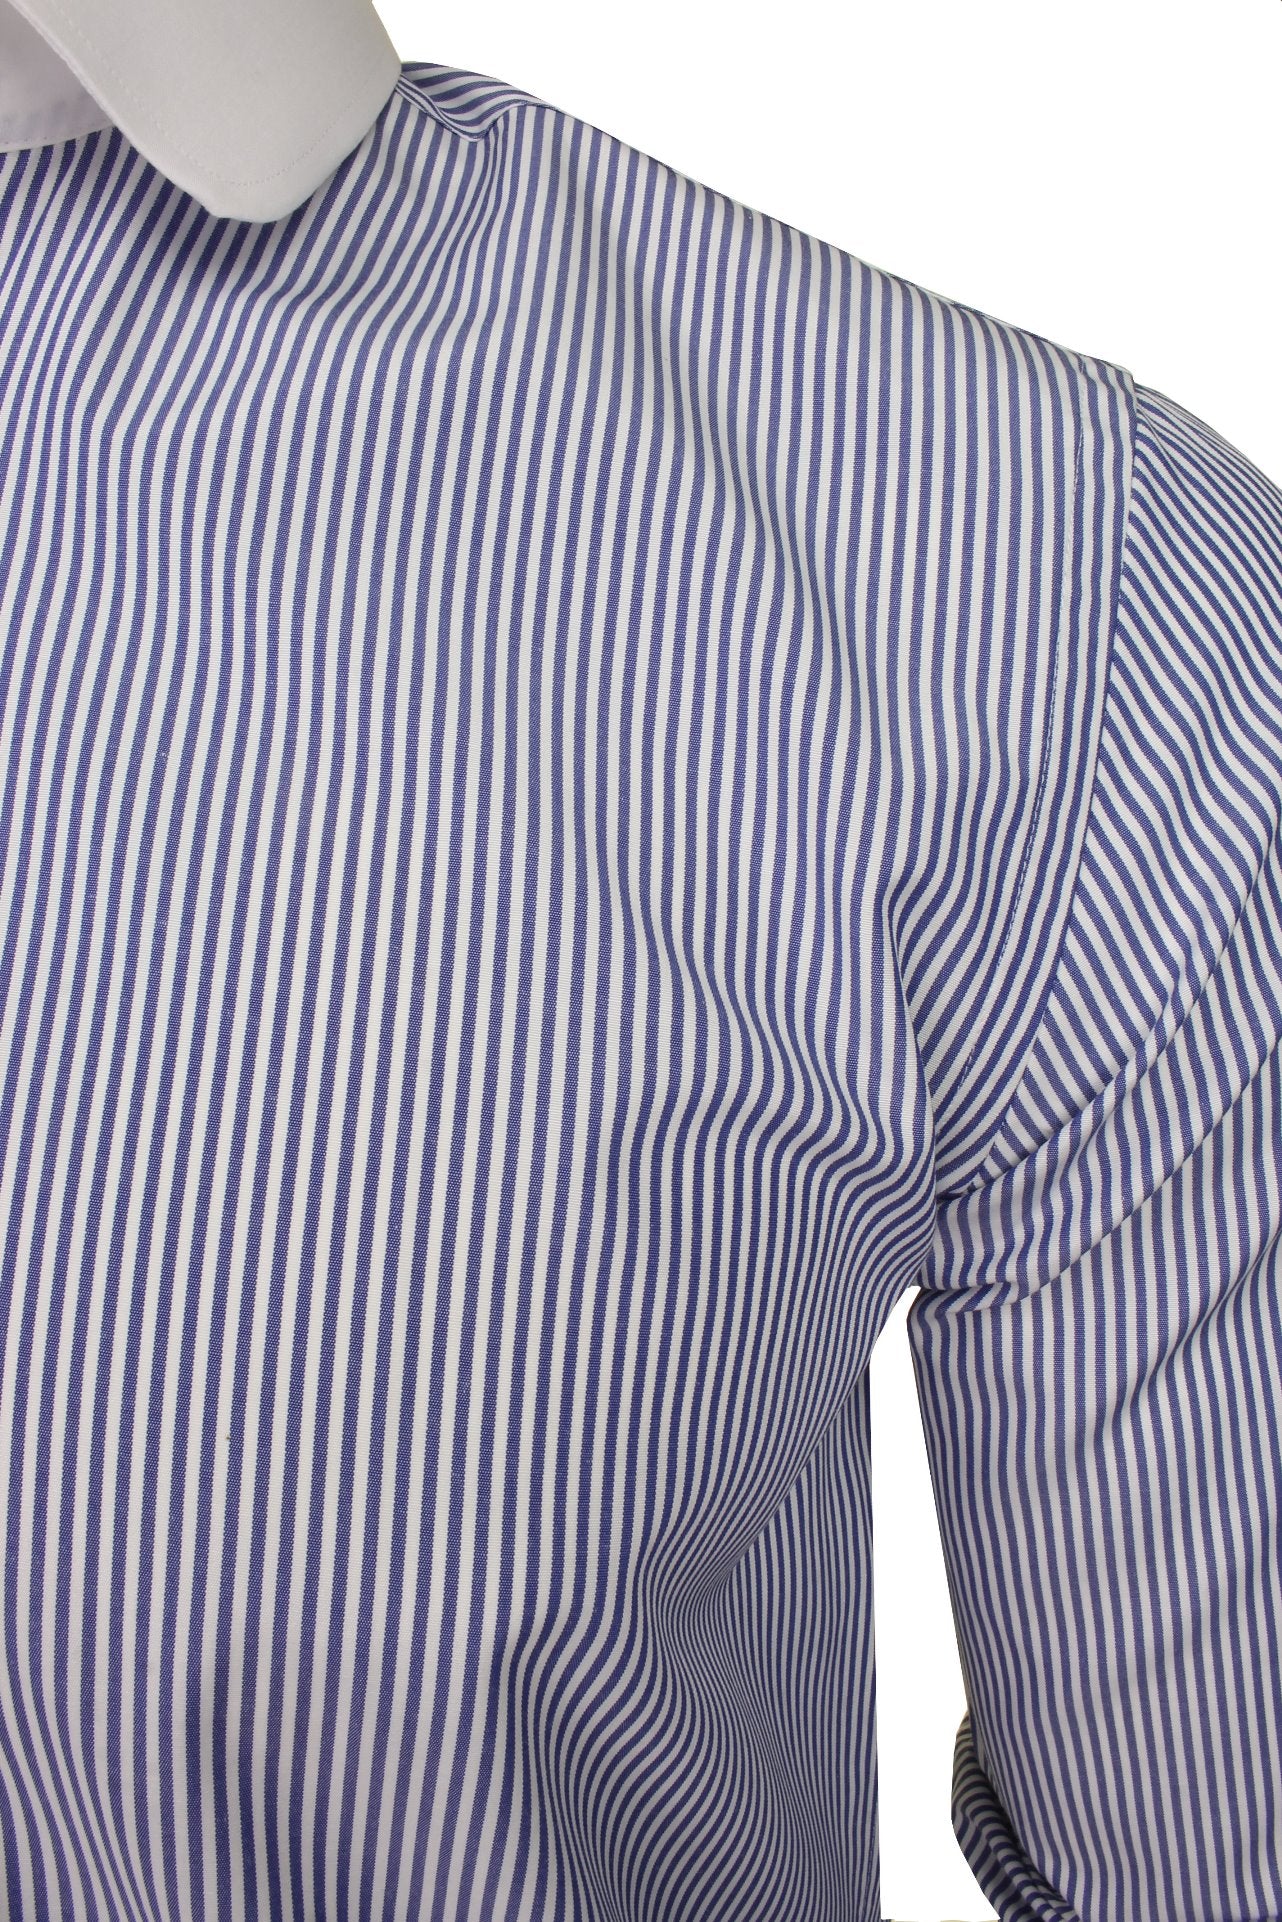 Xact Men's Long-Sleeved Striped Shirt with White Penny/Club Collar and White Cuffs-2